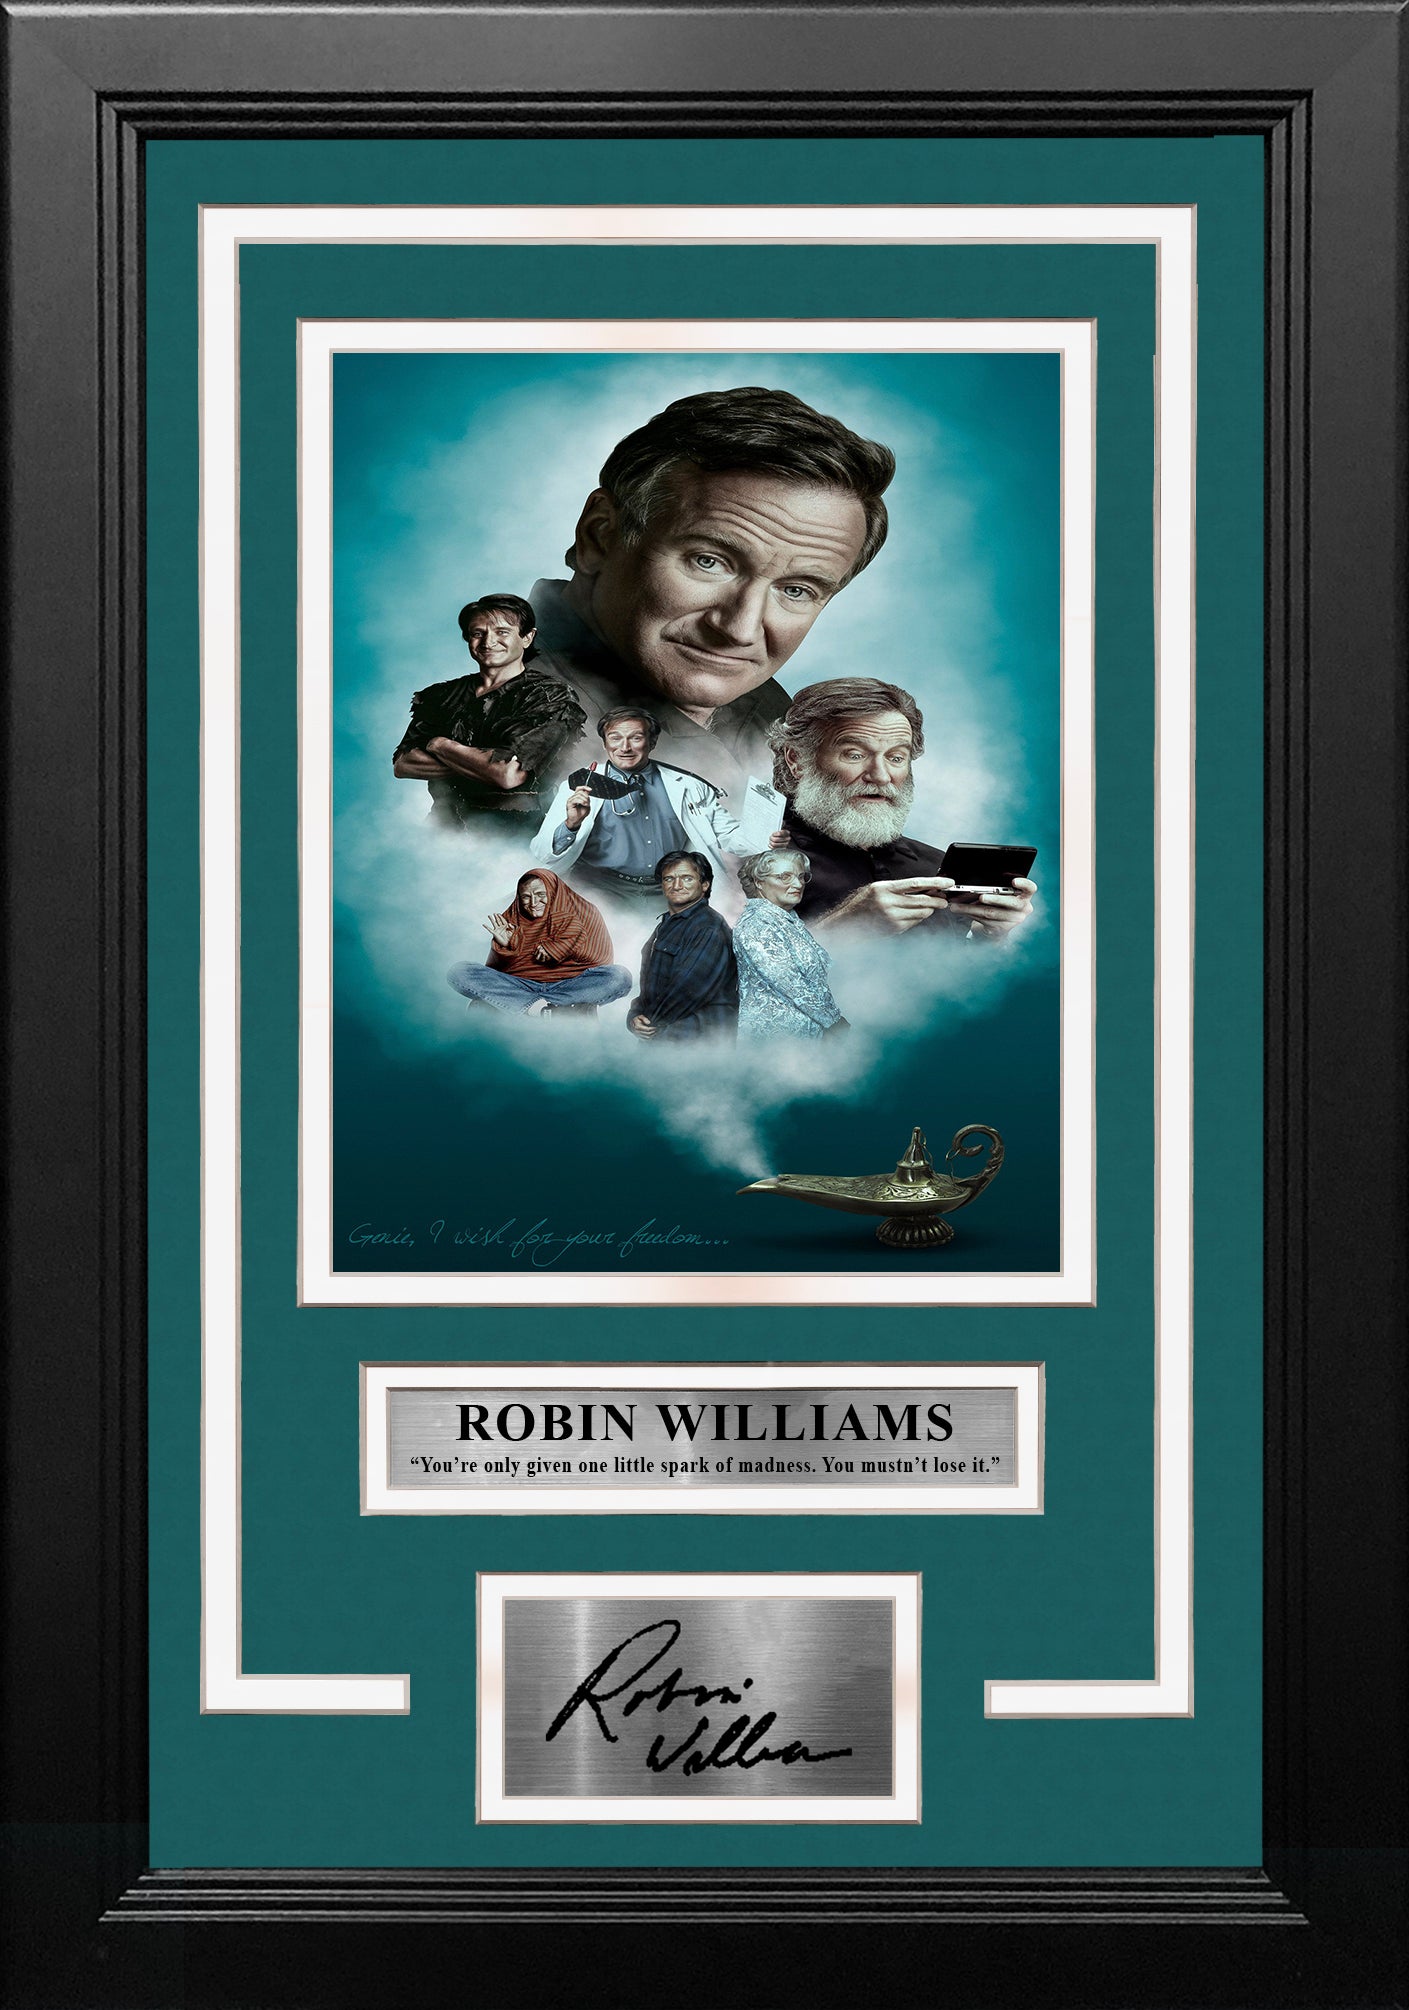 Robin Williams 8" x 10" Framed Collage Photo with Engraved Autograph - Dynasty Sports & Framing 